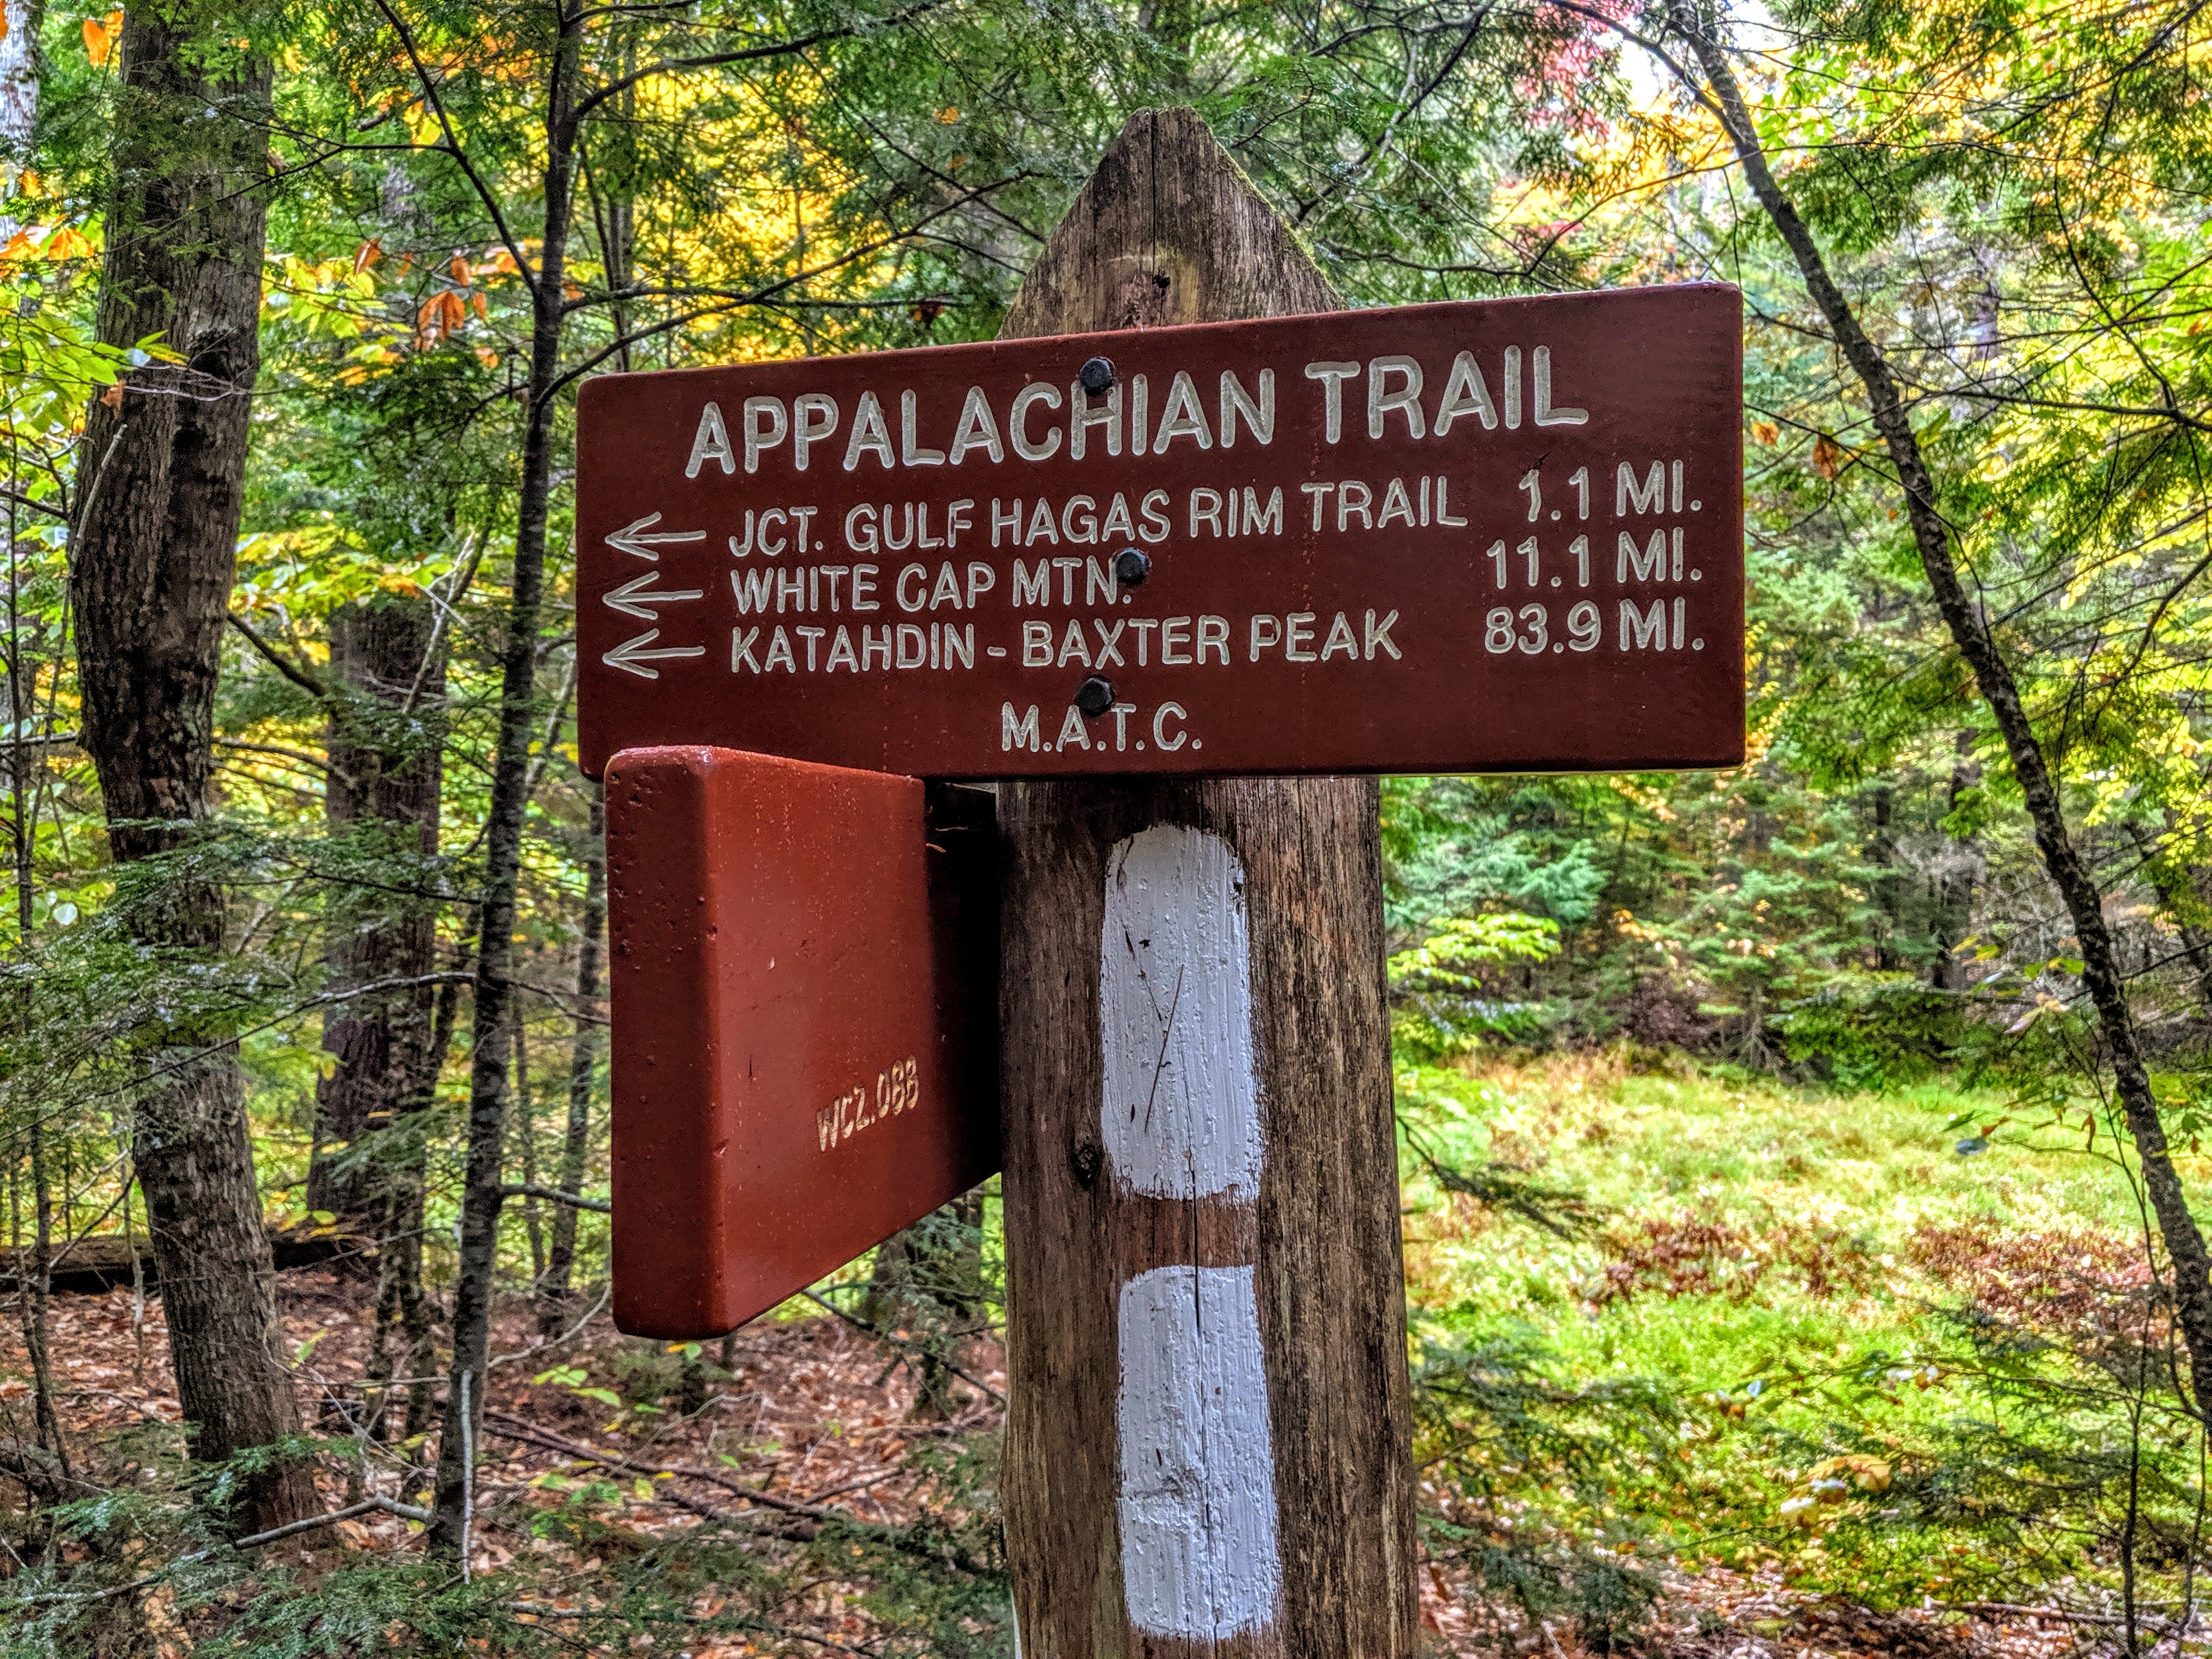 This sign is about 1/4 mile from the campsites.